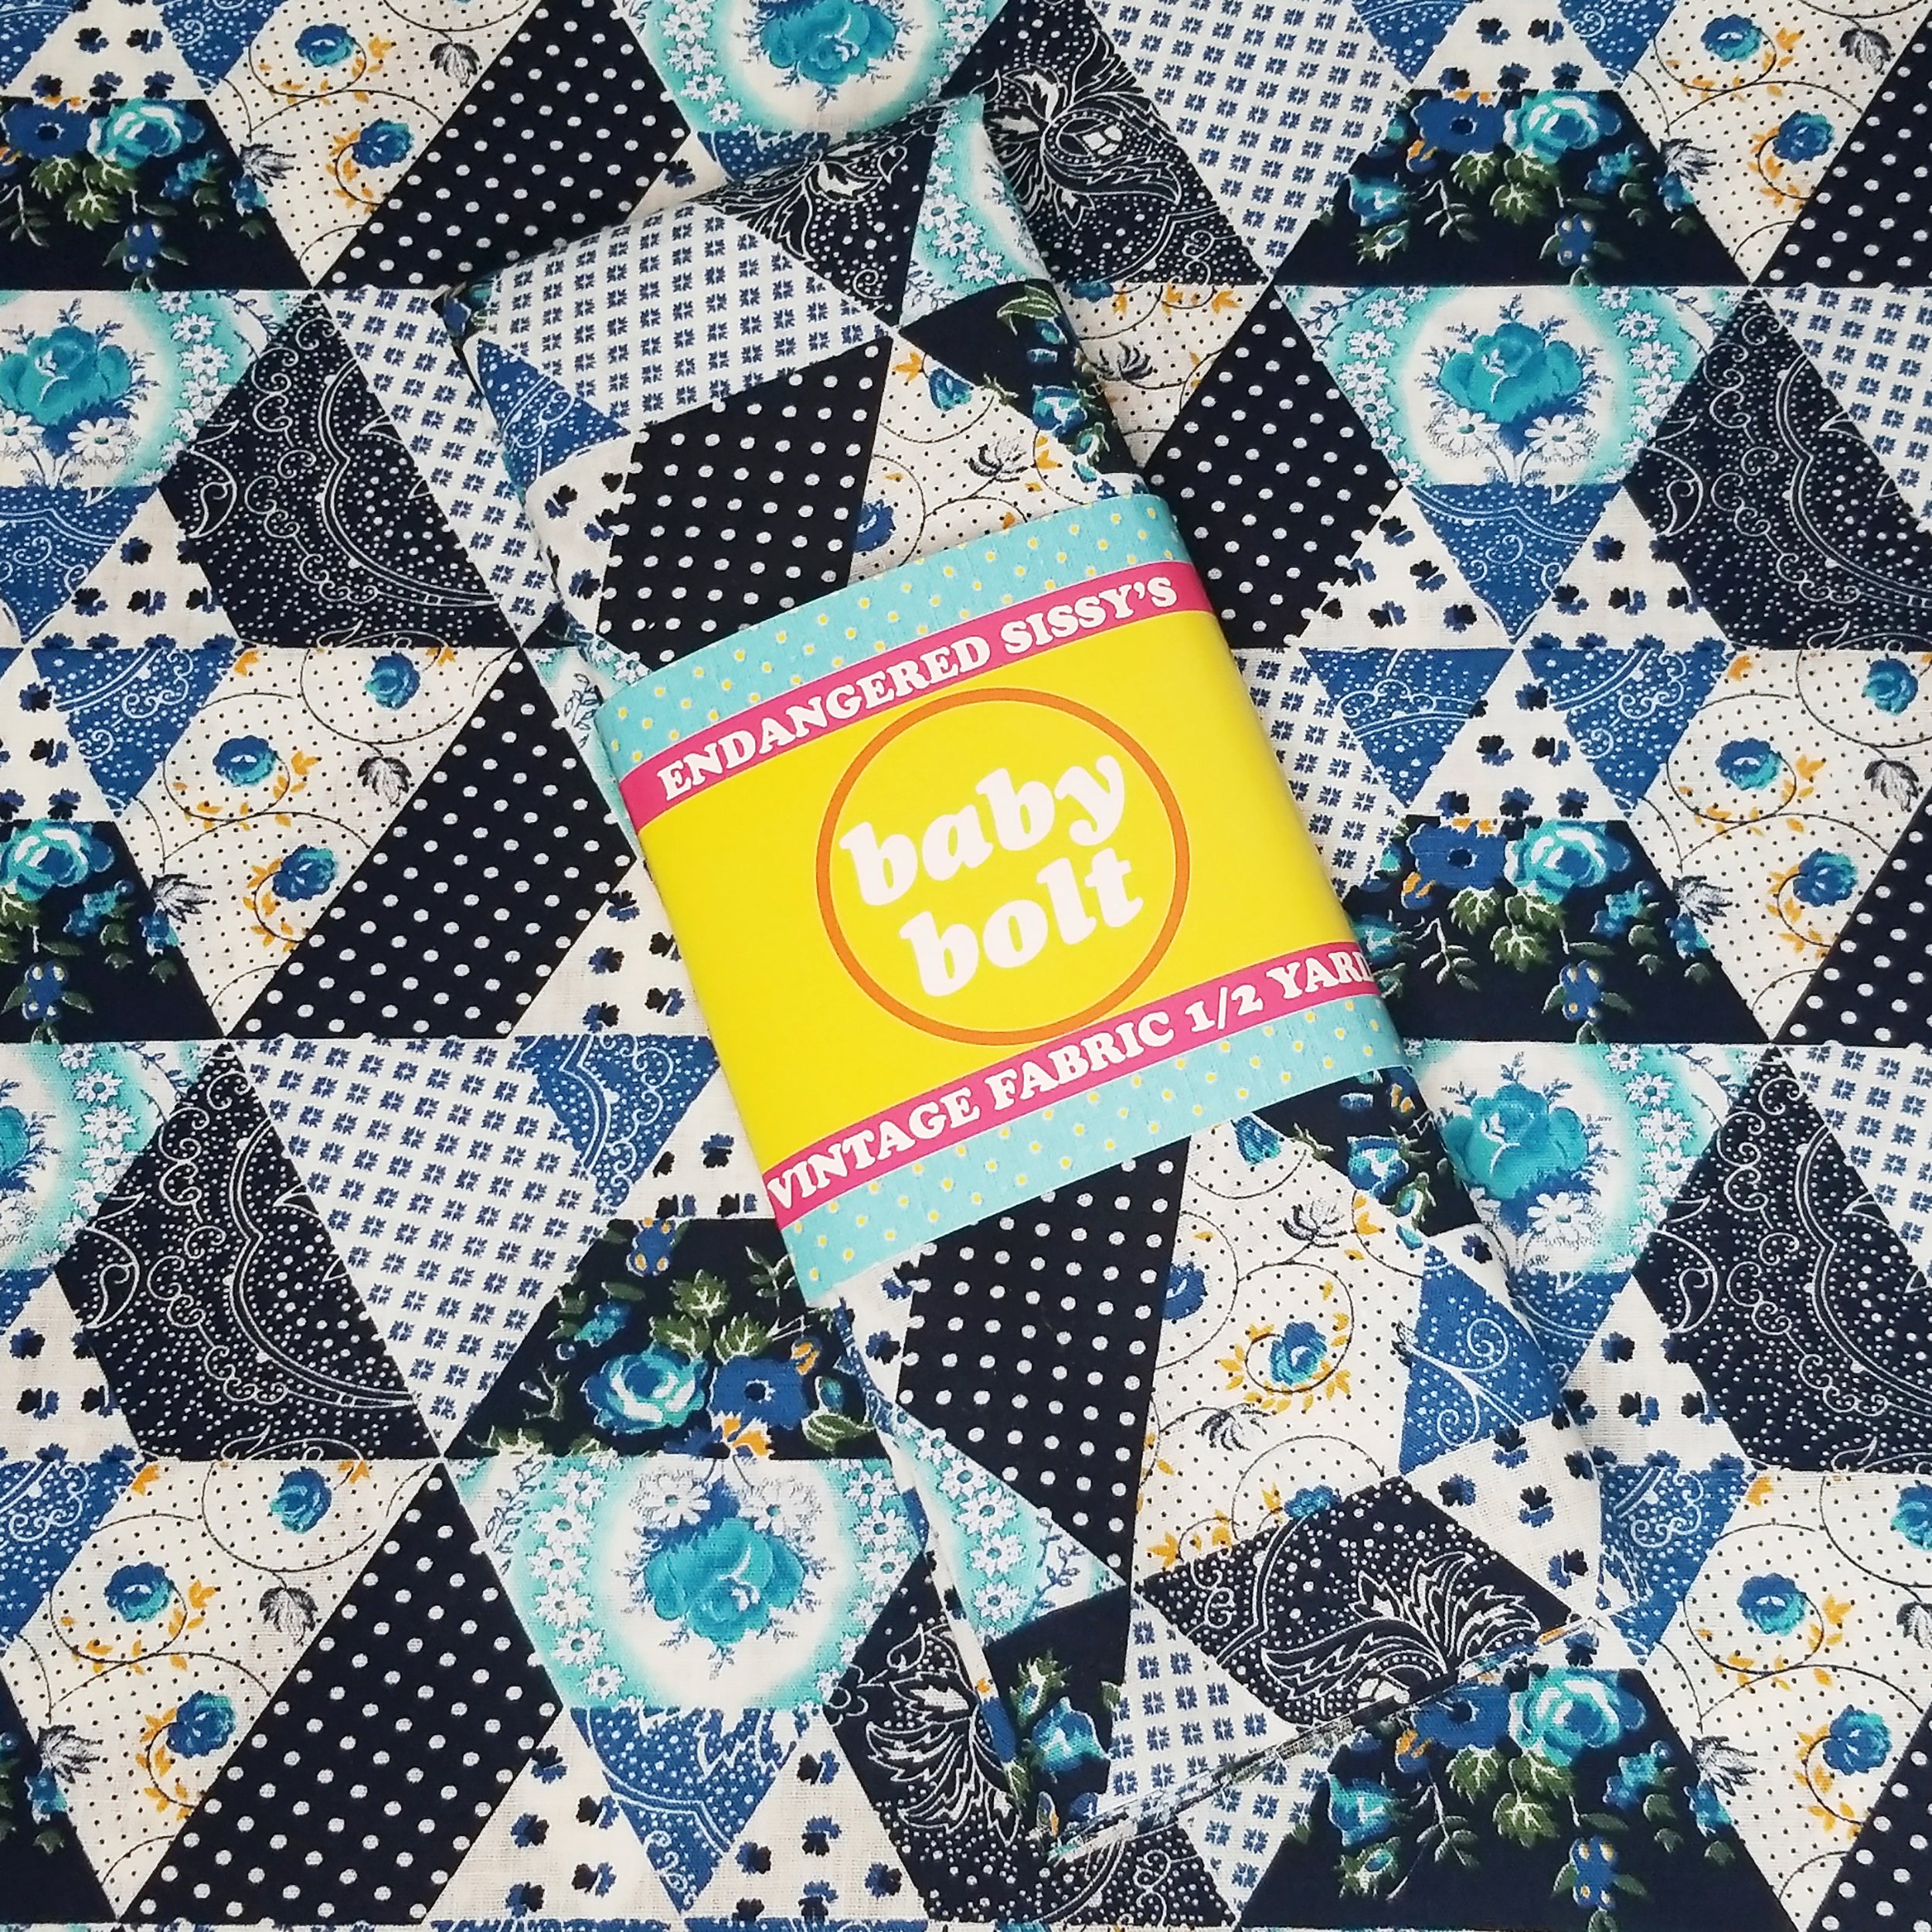 VINTAGE FABRIC BABY BOLT HALF-YARD -  SEVENTIES' FAUX PATCHWORK CHEATER QUILT PRINT IN BLUES, WHITE & YELLOW